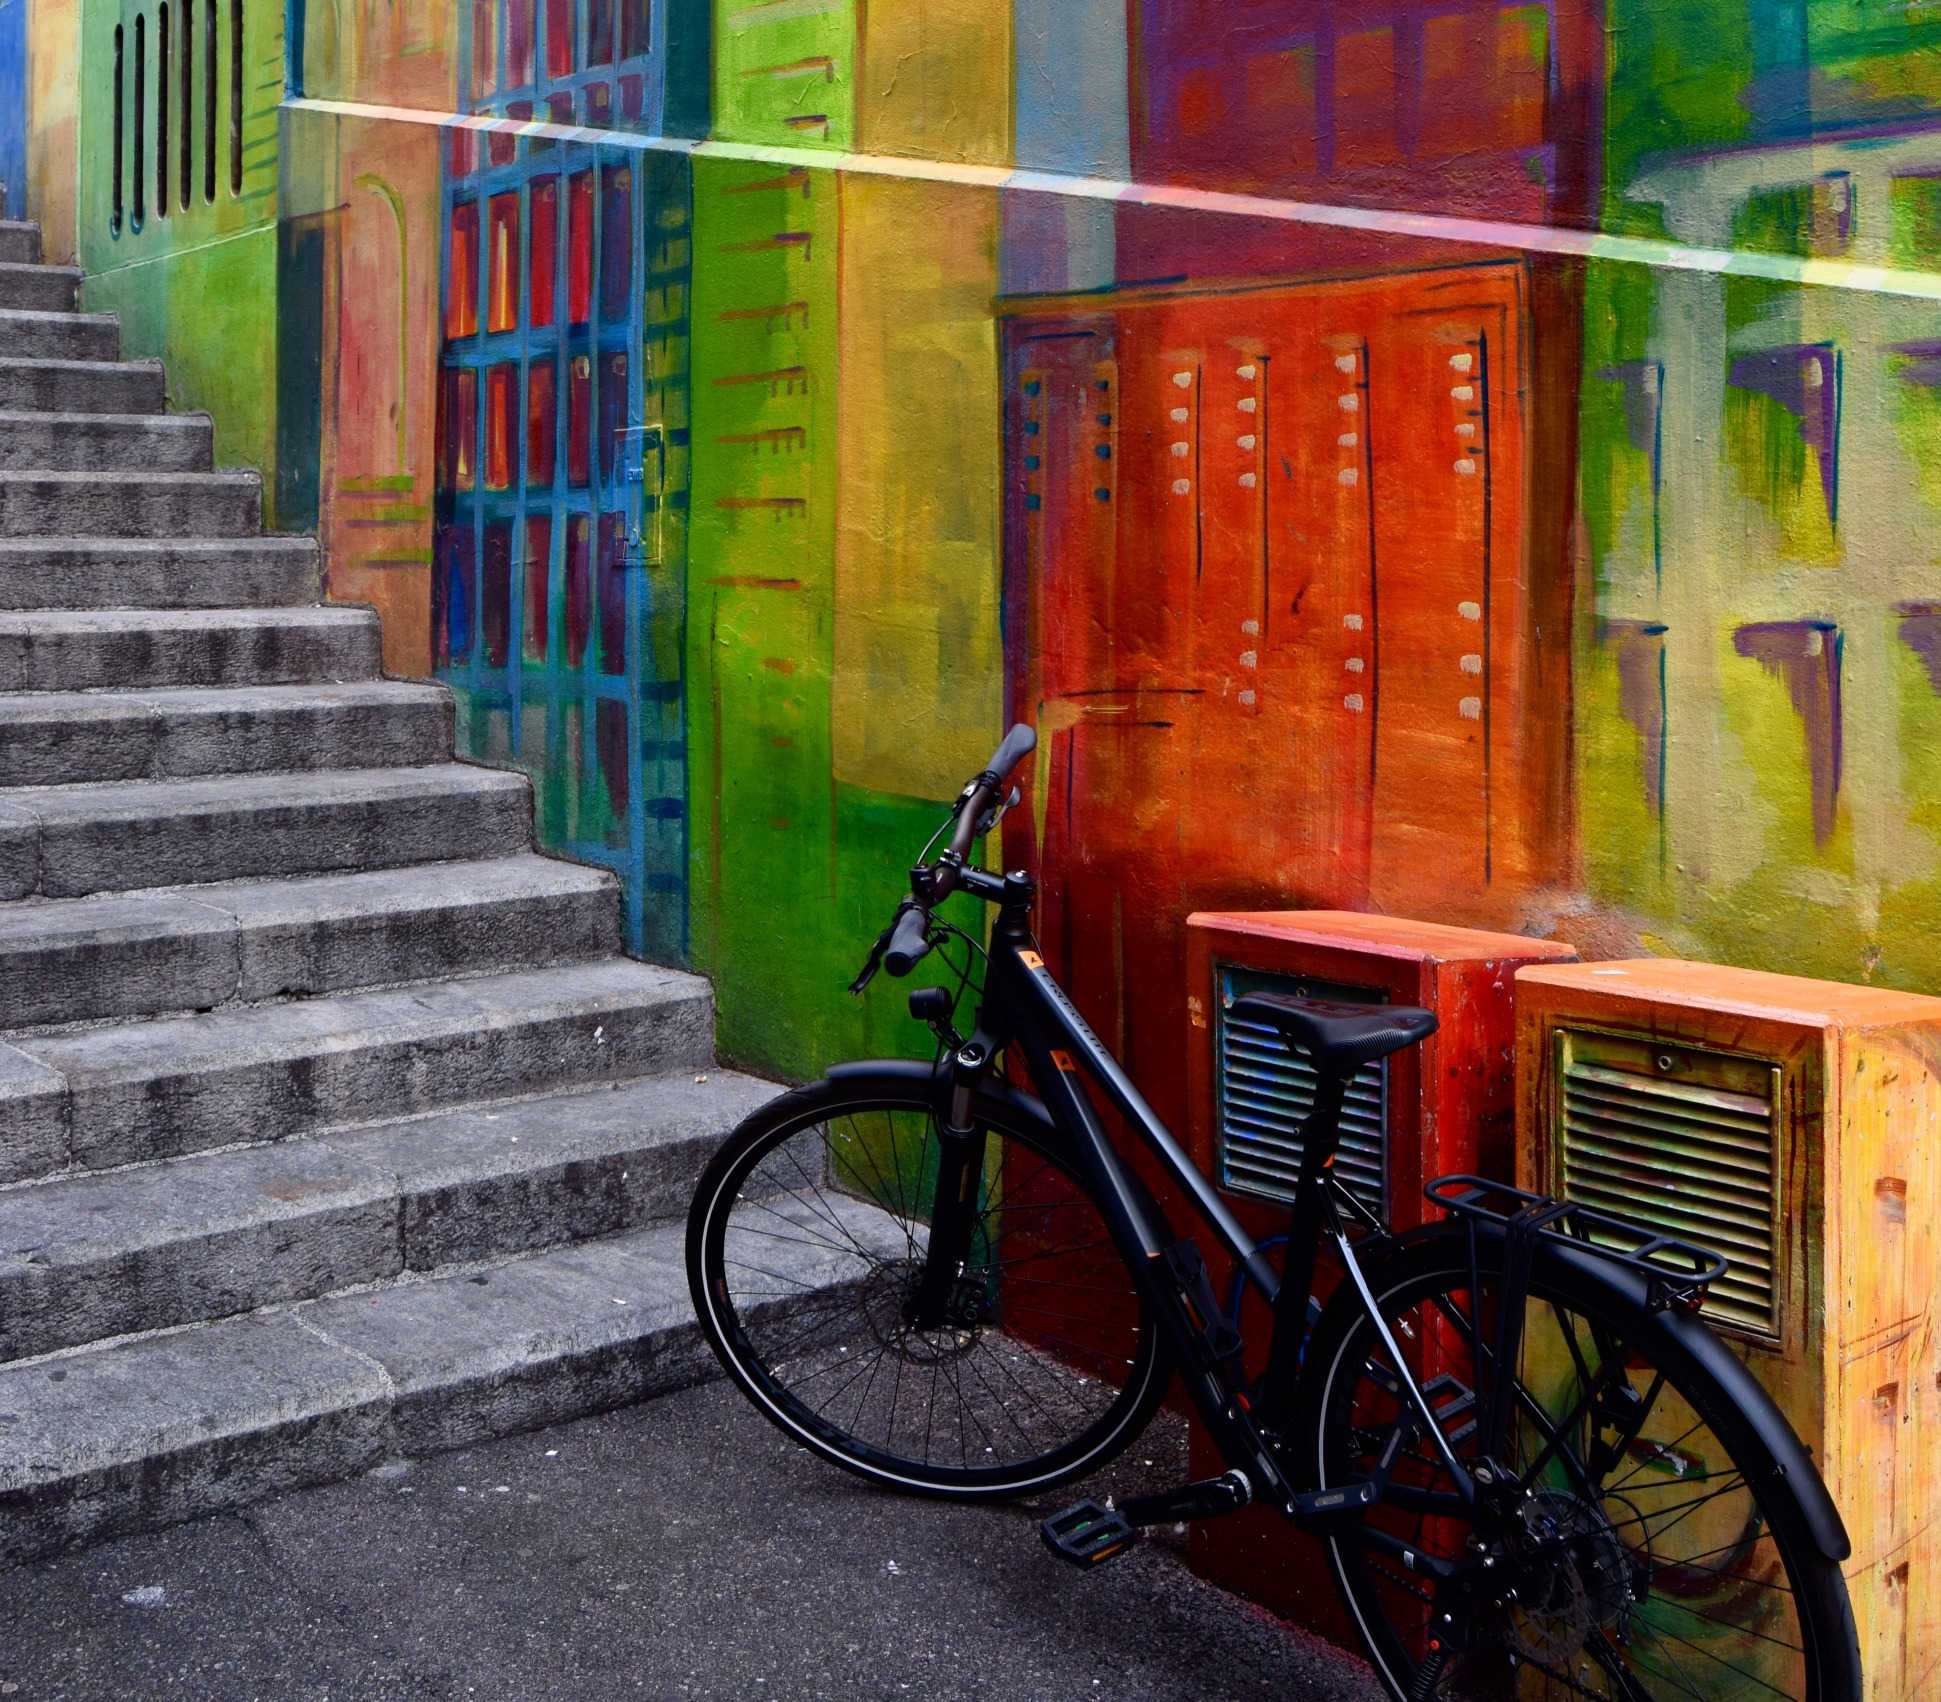 Bike leaning against colourful stairway